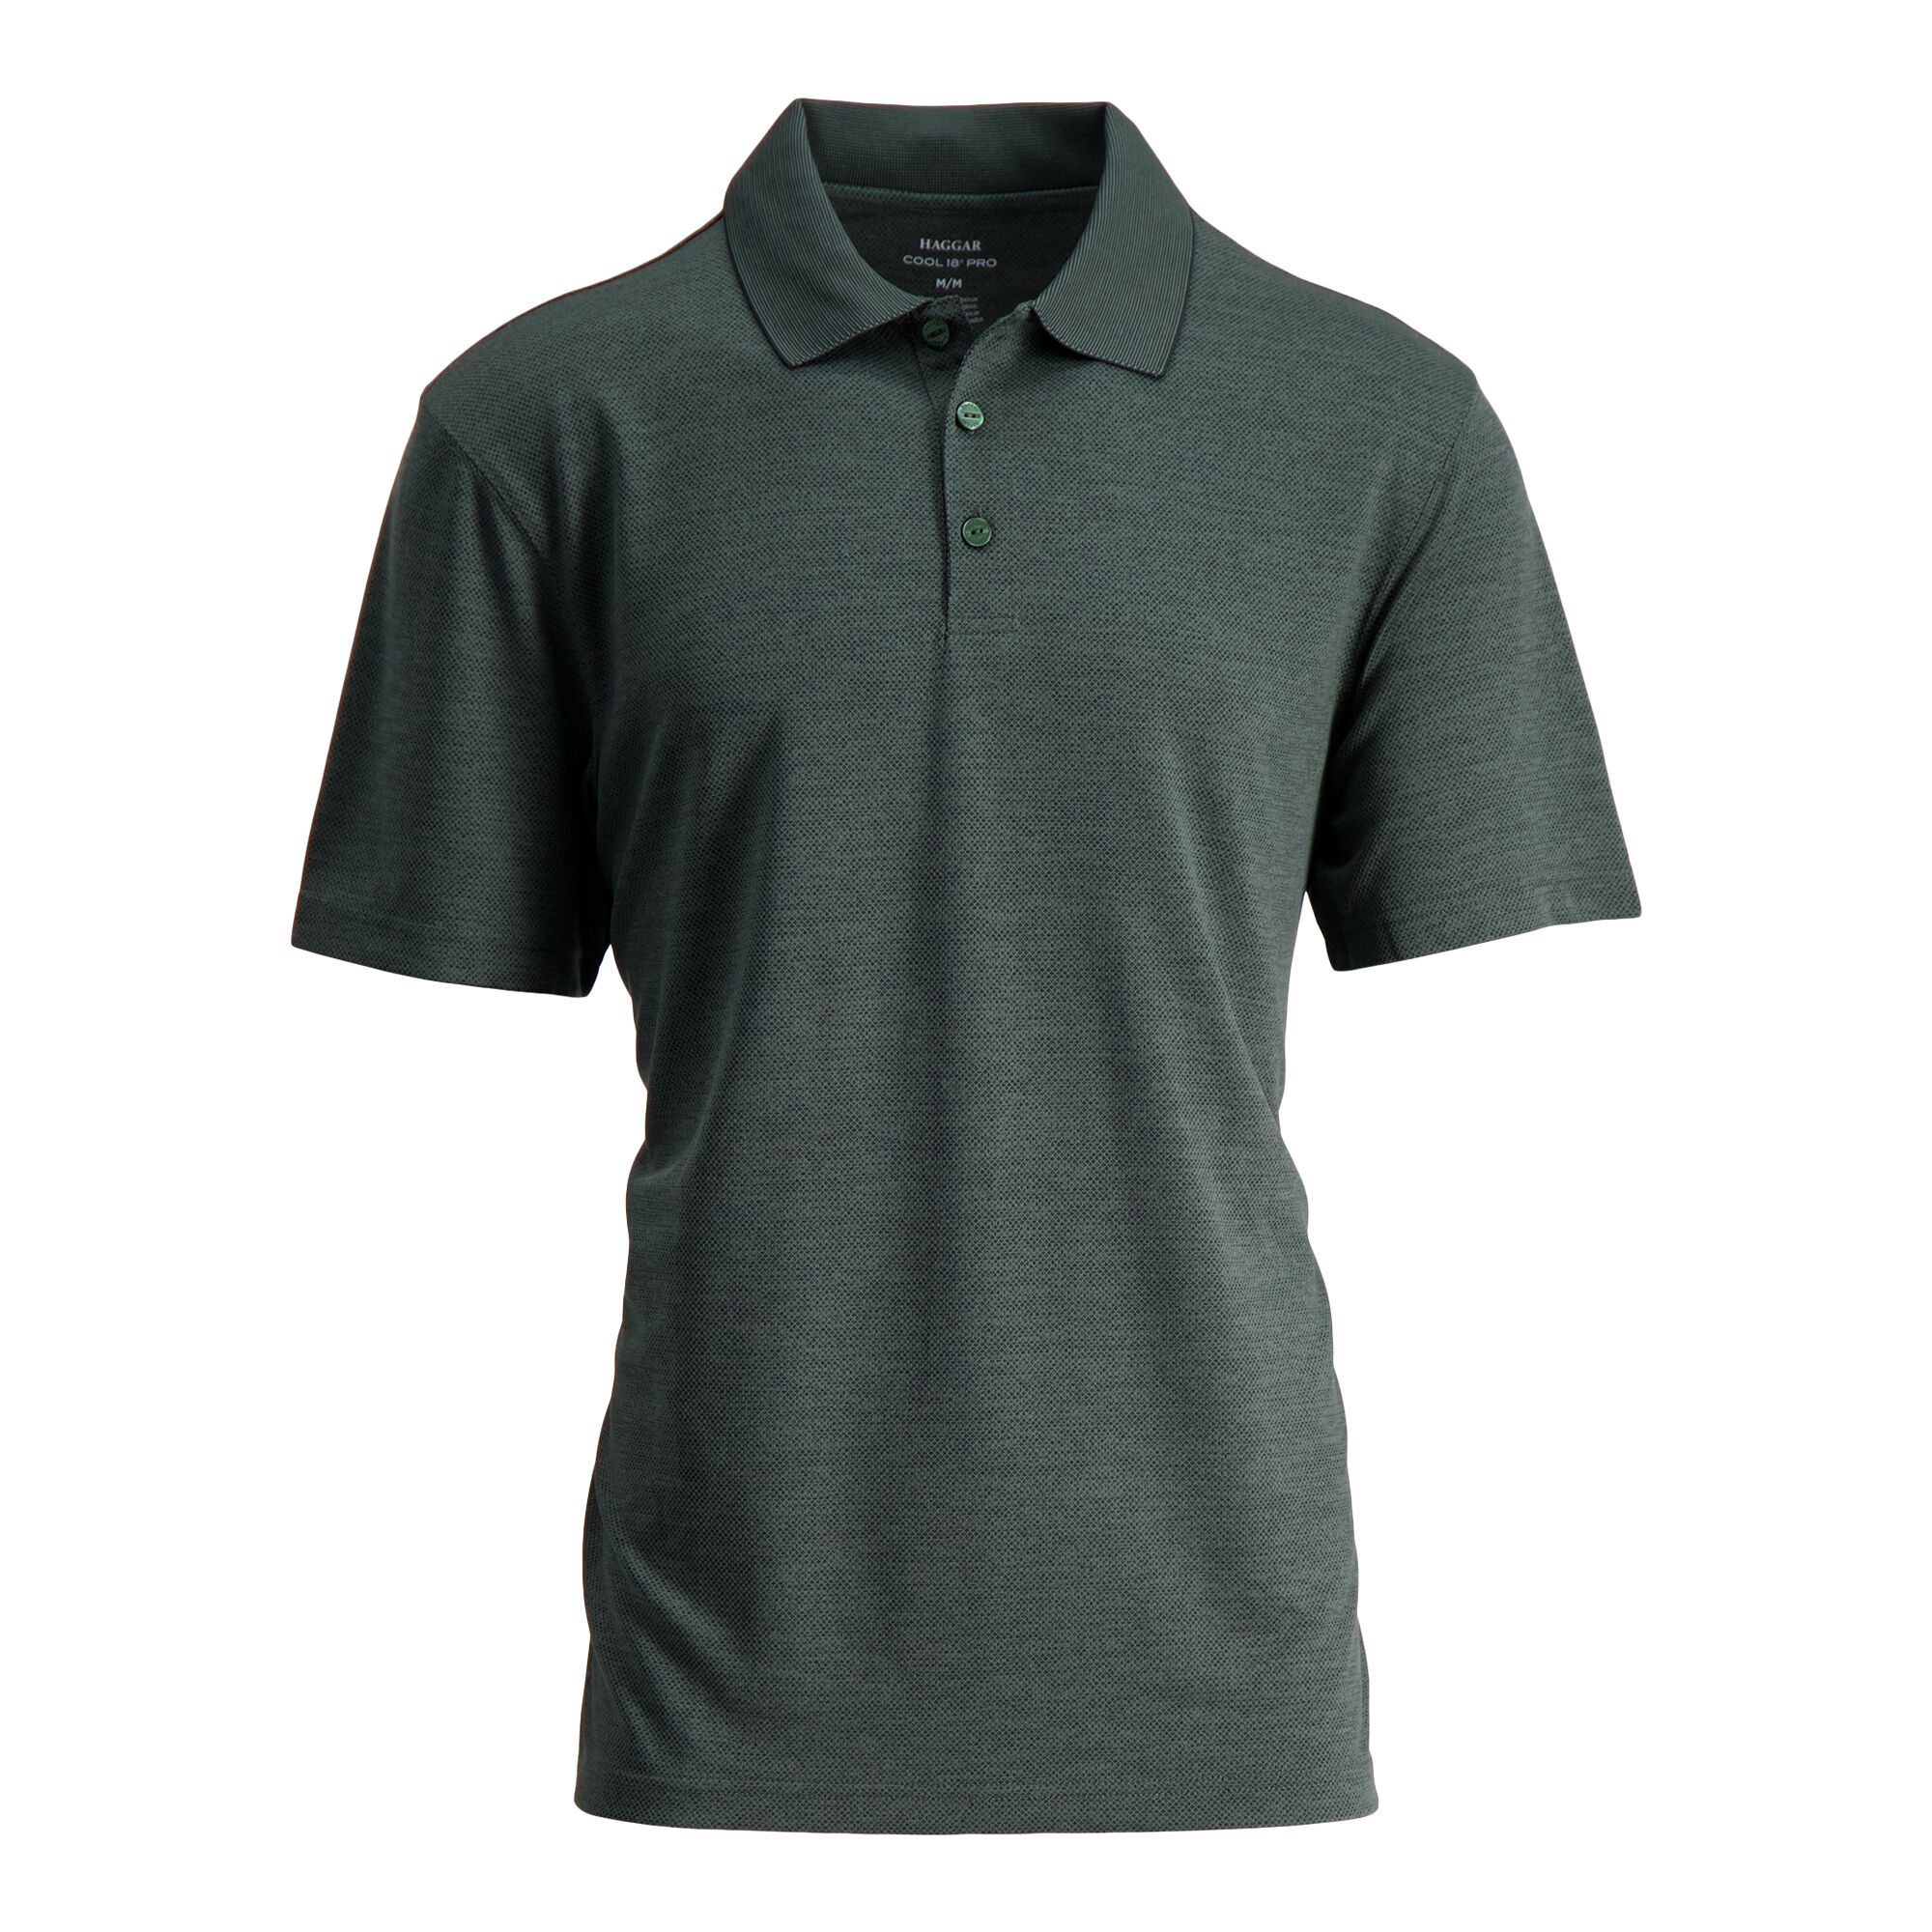 Haggar Cool 18 Pro Textured Golf Polo Vine Heather (028462 Clothing Shirts & Tops) photo